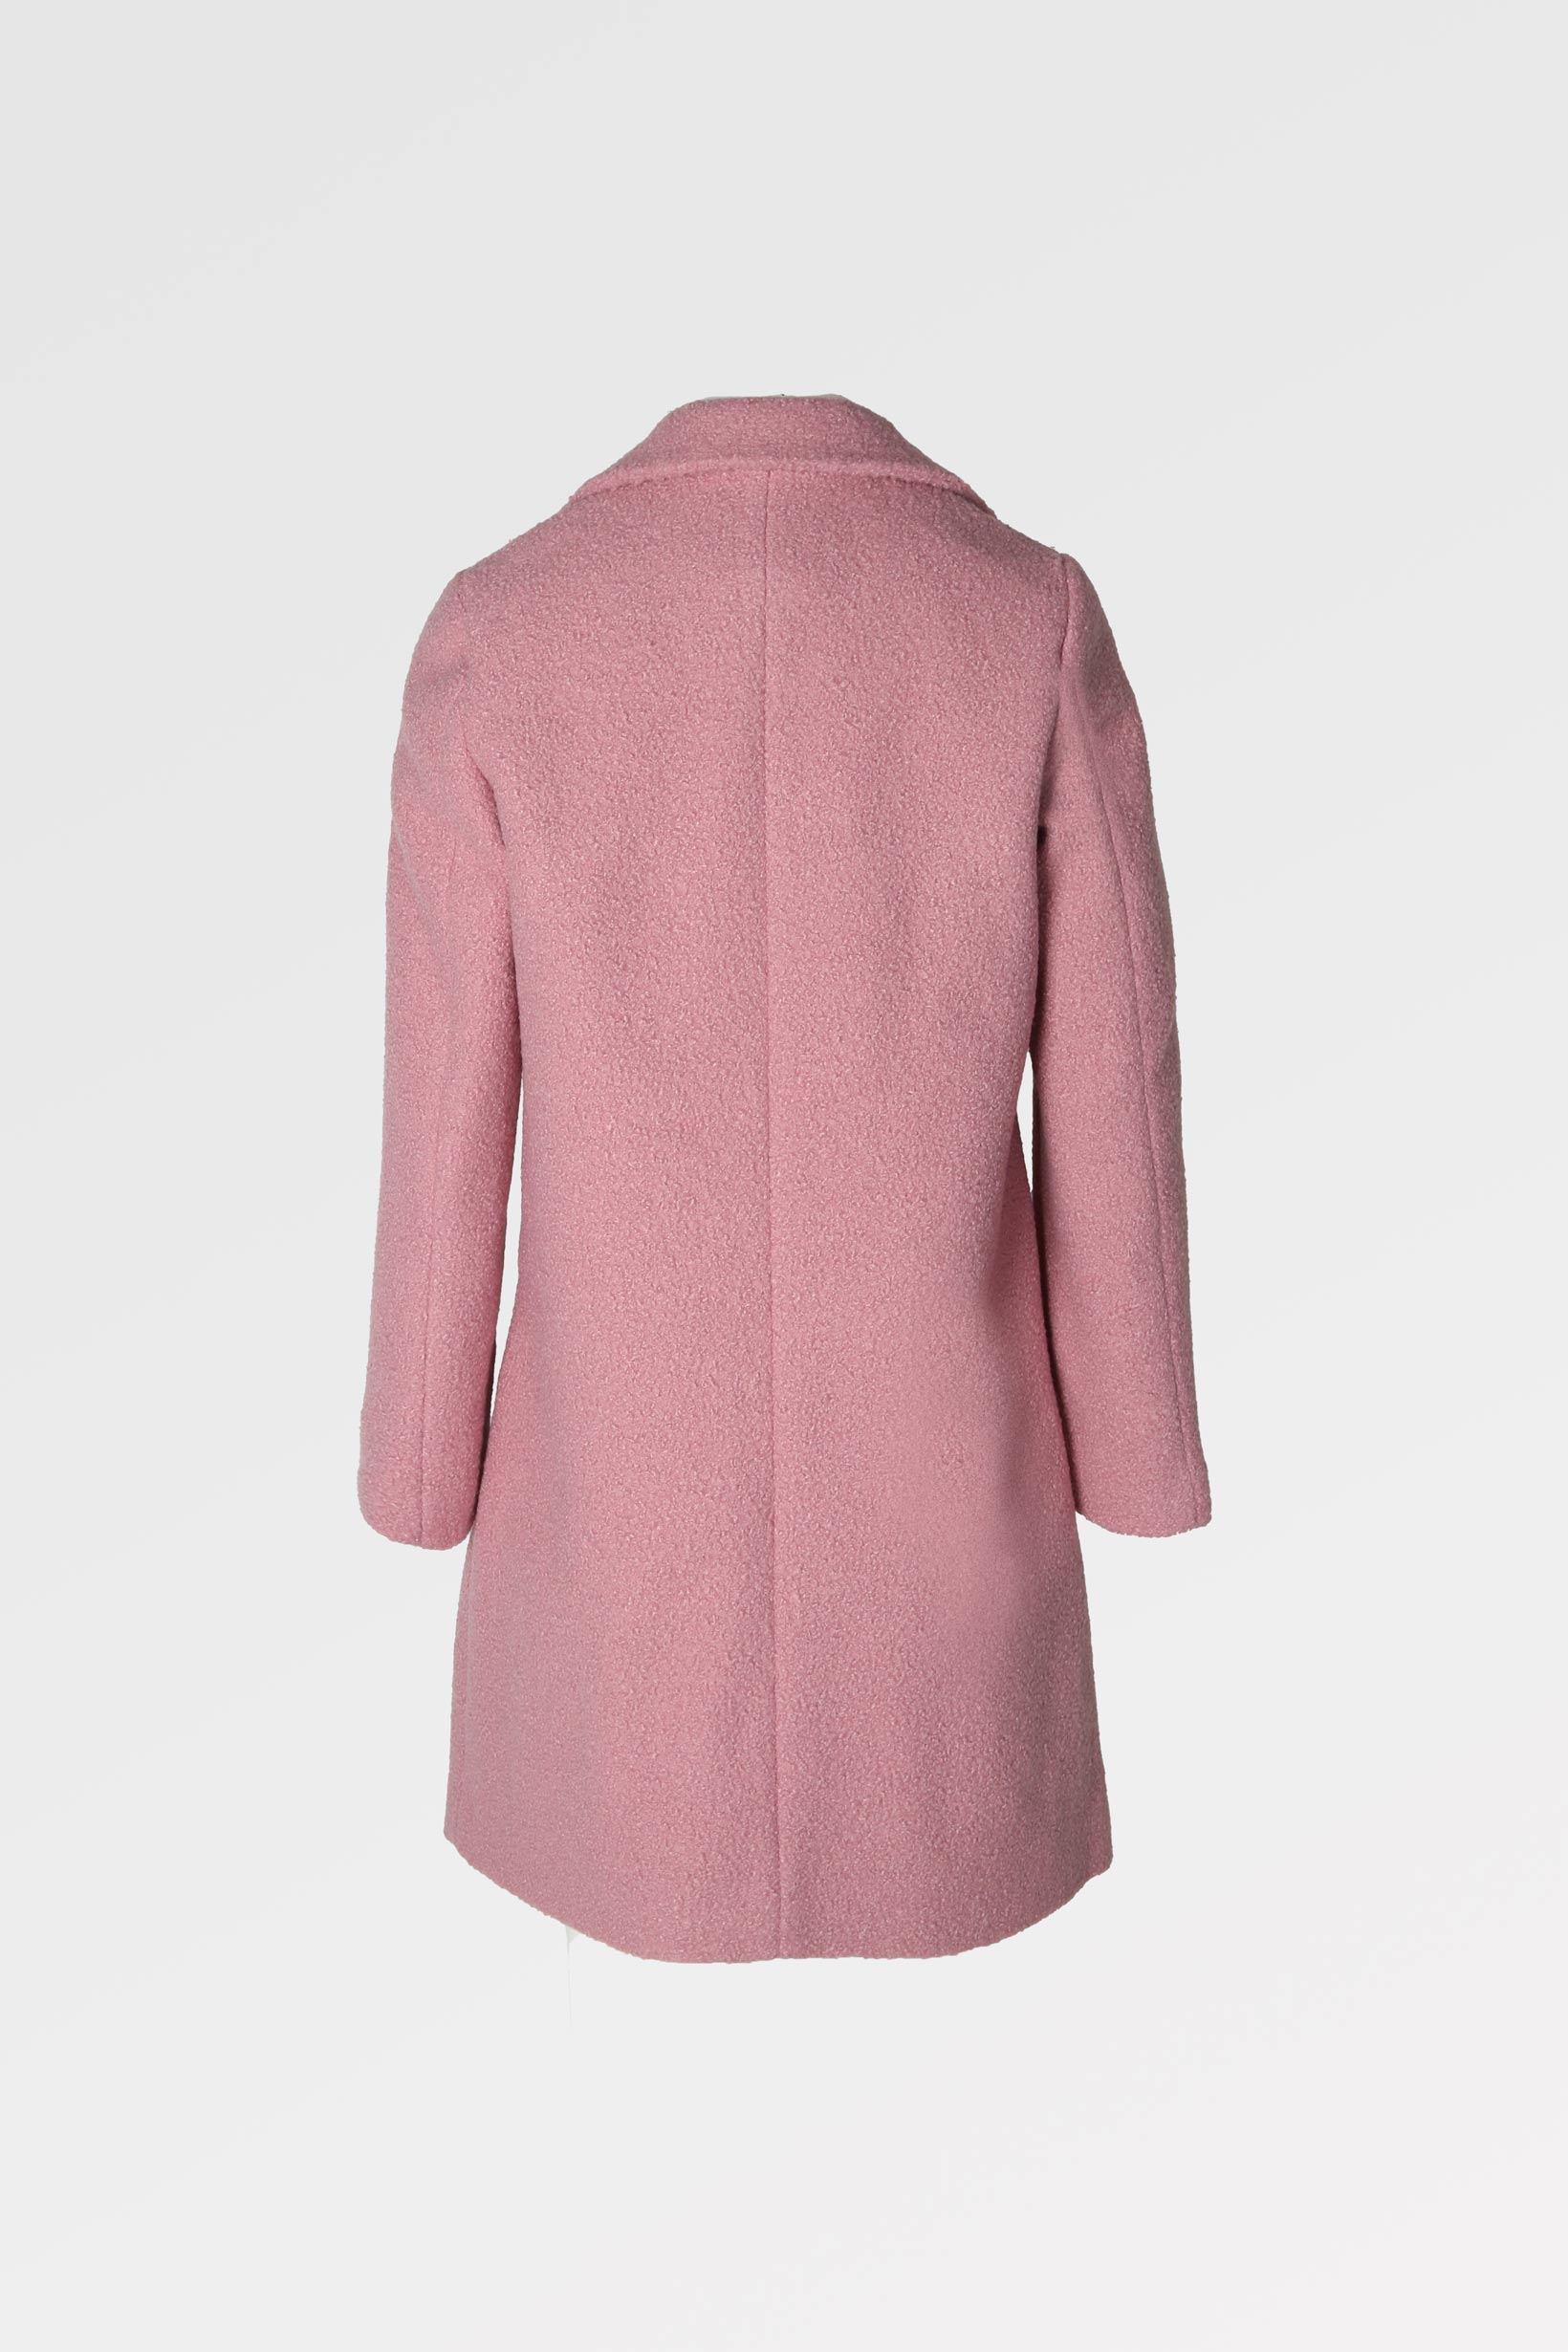 Overcoat Pink Casual Woman